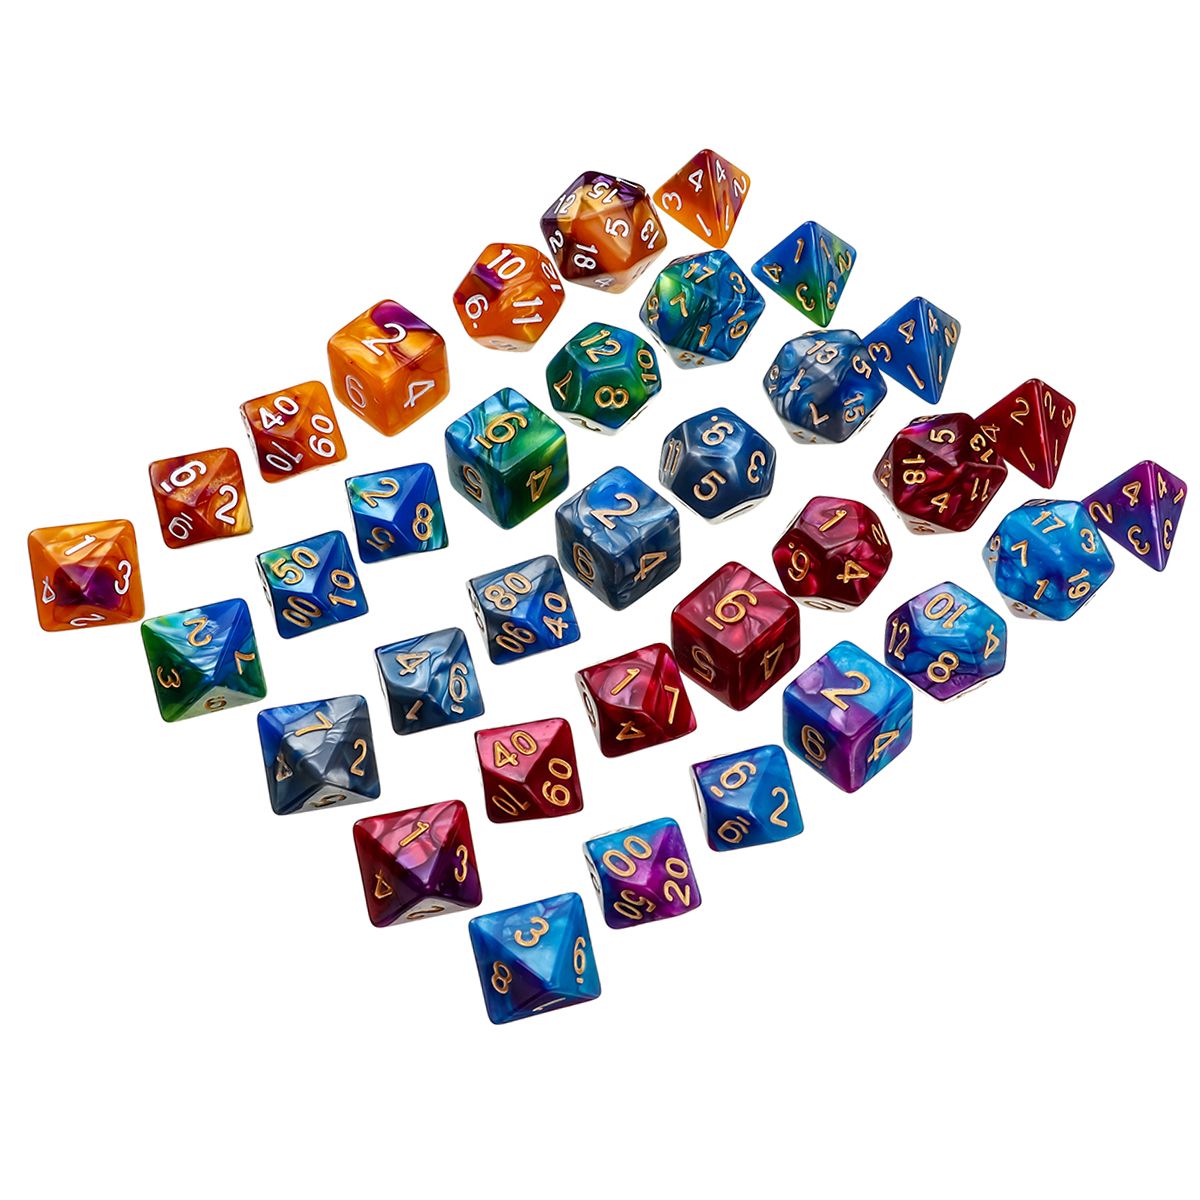 35Pcs-Acrylic-Polyhedral-Dice-Set-Role-Playing-Game-Dices-Gadget-for-Dungeons-Dragons-D20-D12-D10-D8-1600700